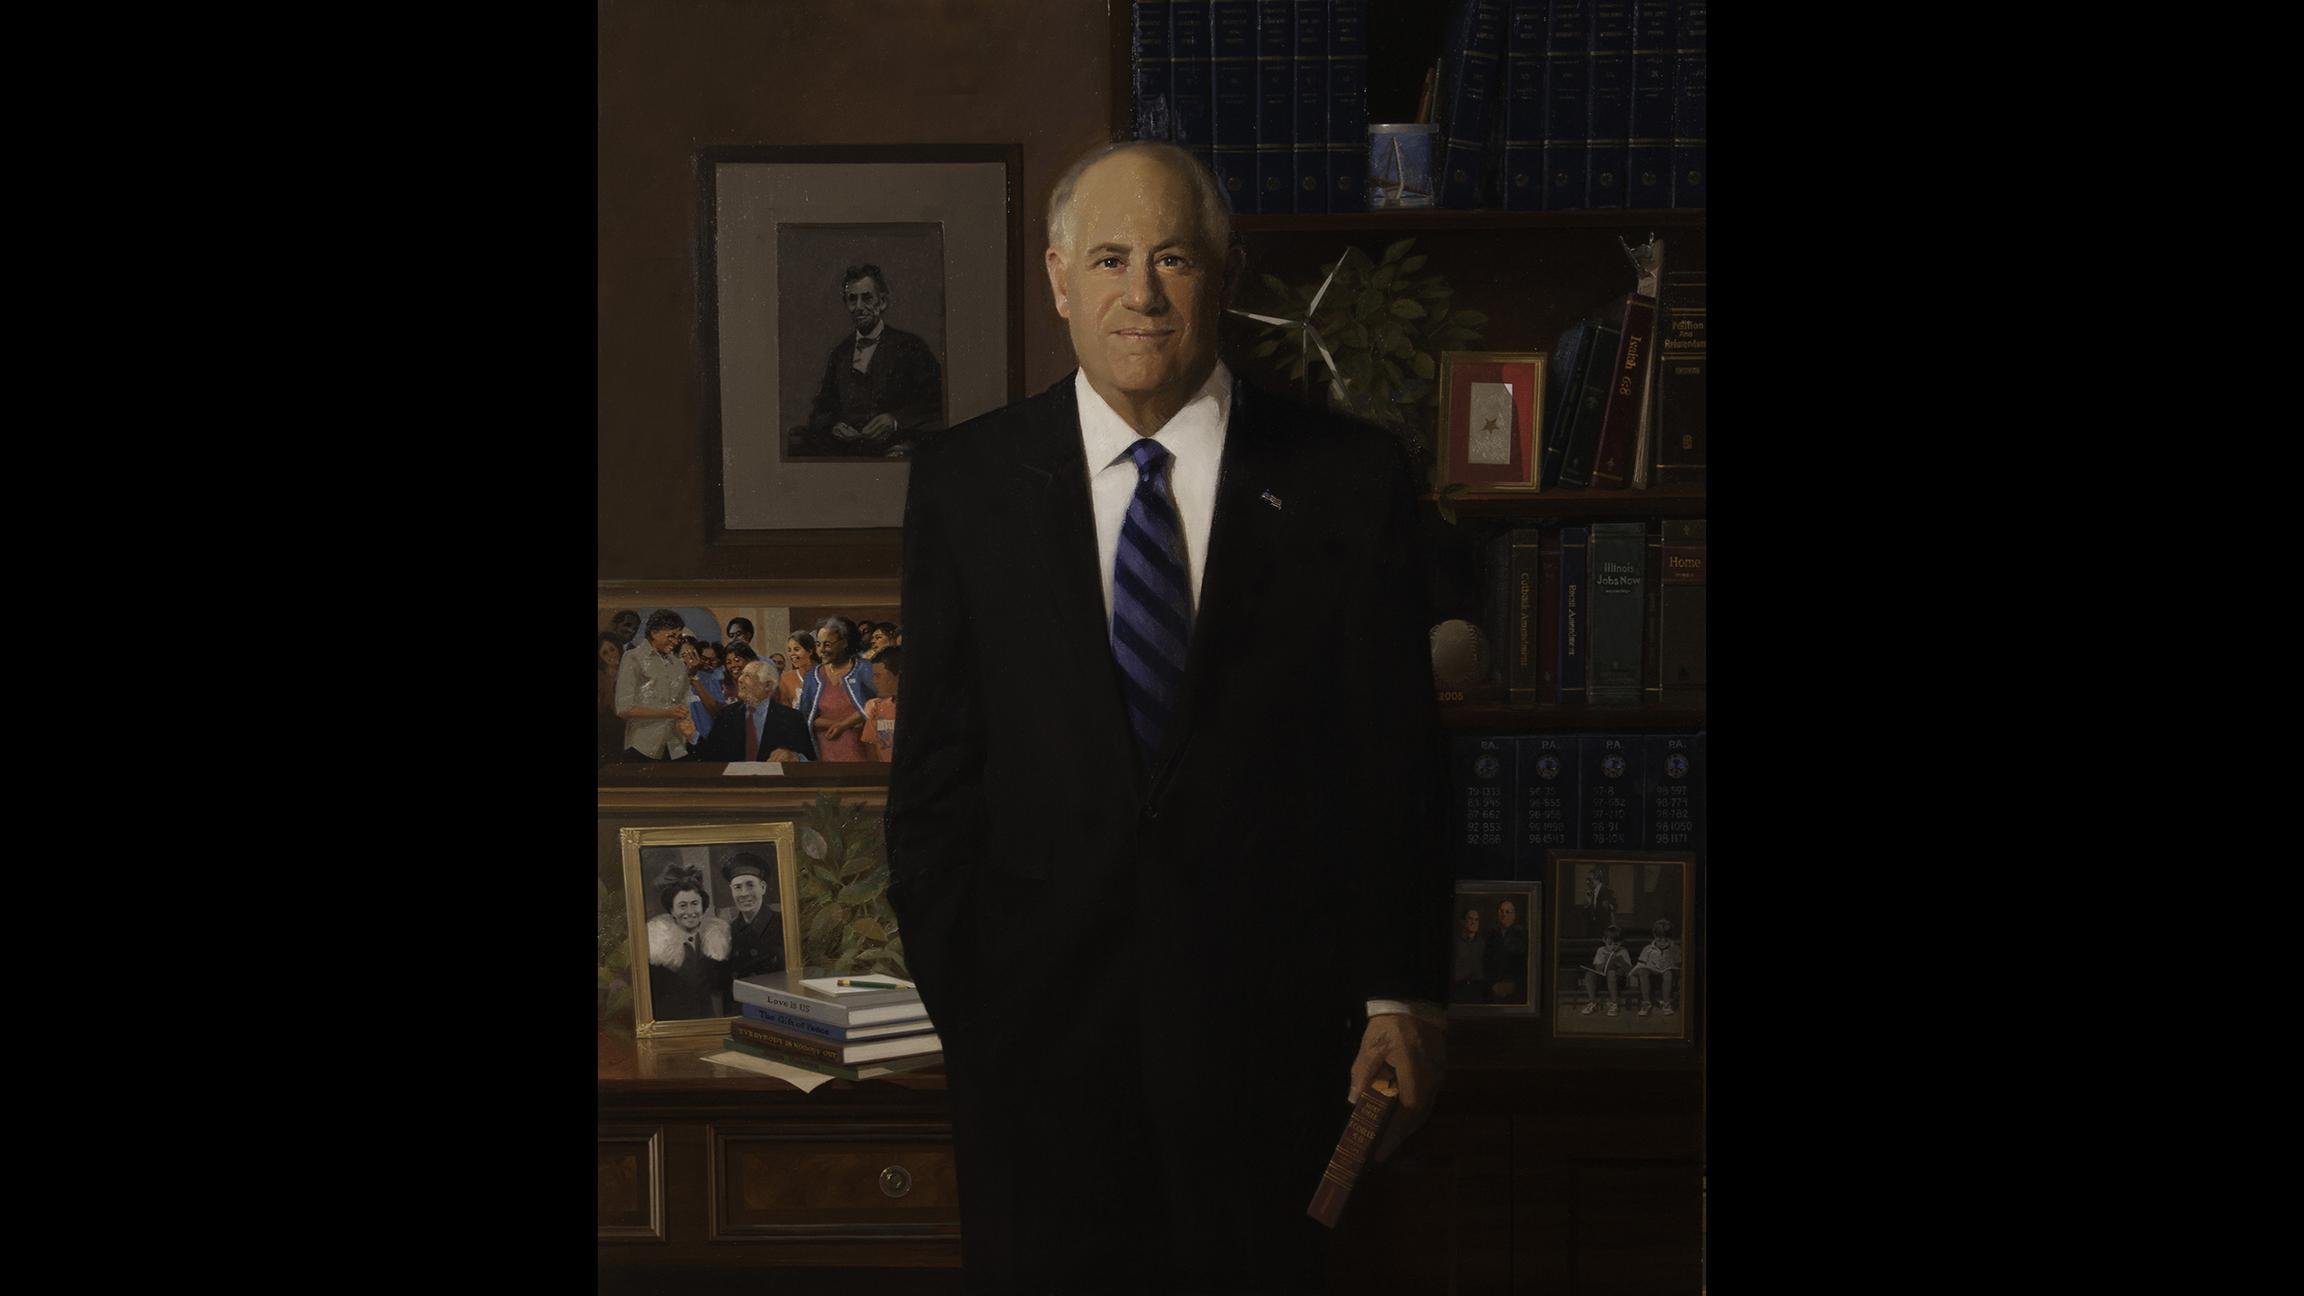 Portrait of former Illinois Gov. Pat Quinn by artist William T. Chambers. (Click to enlarge)